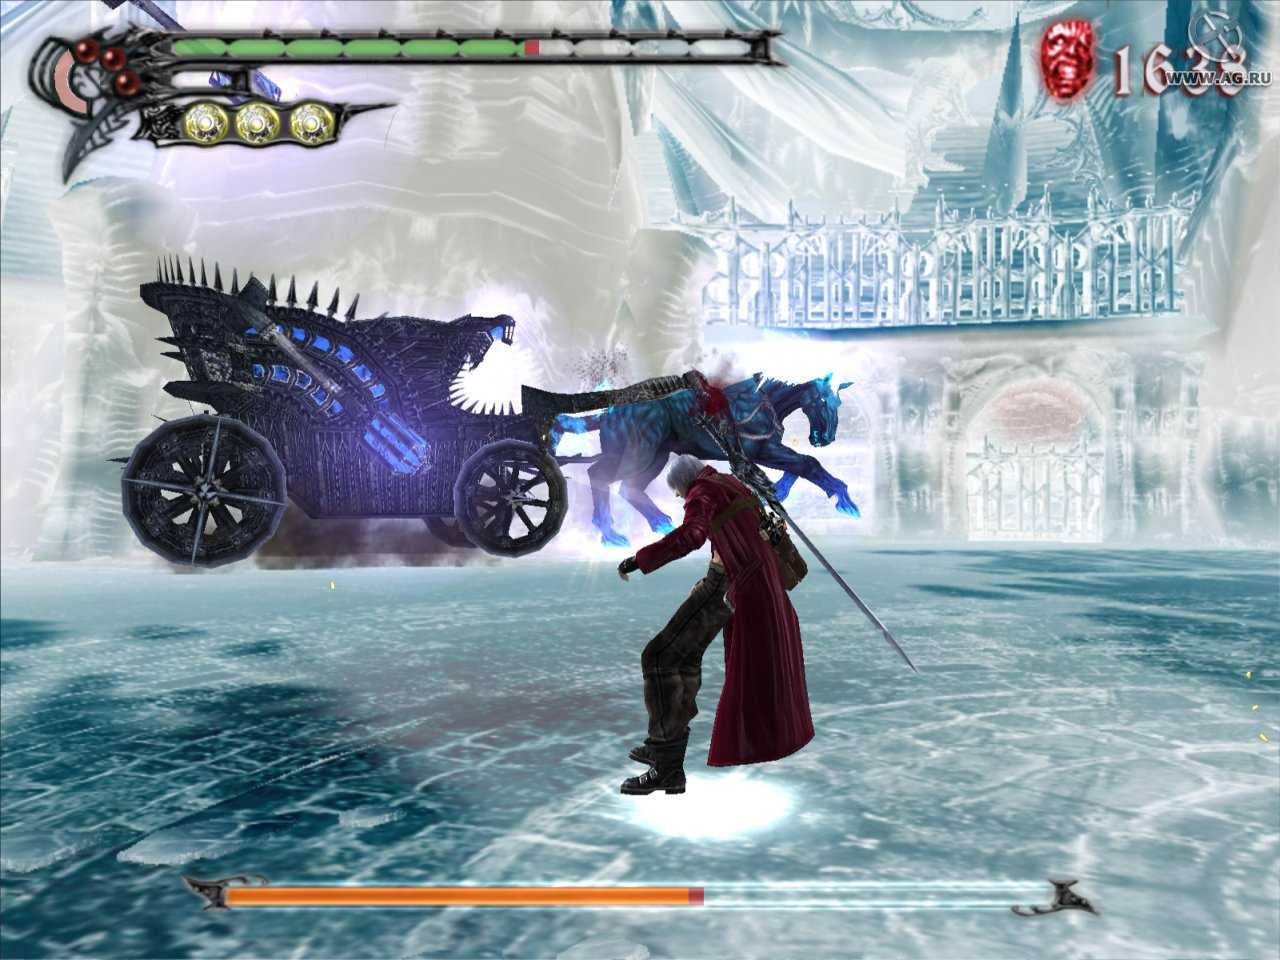 Devil may cry 3 can find steam фото 102